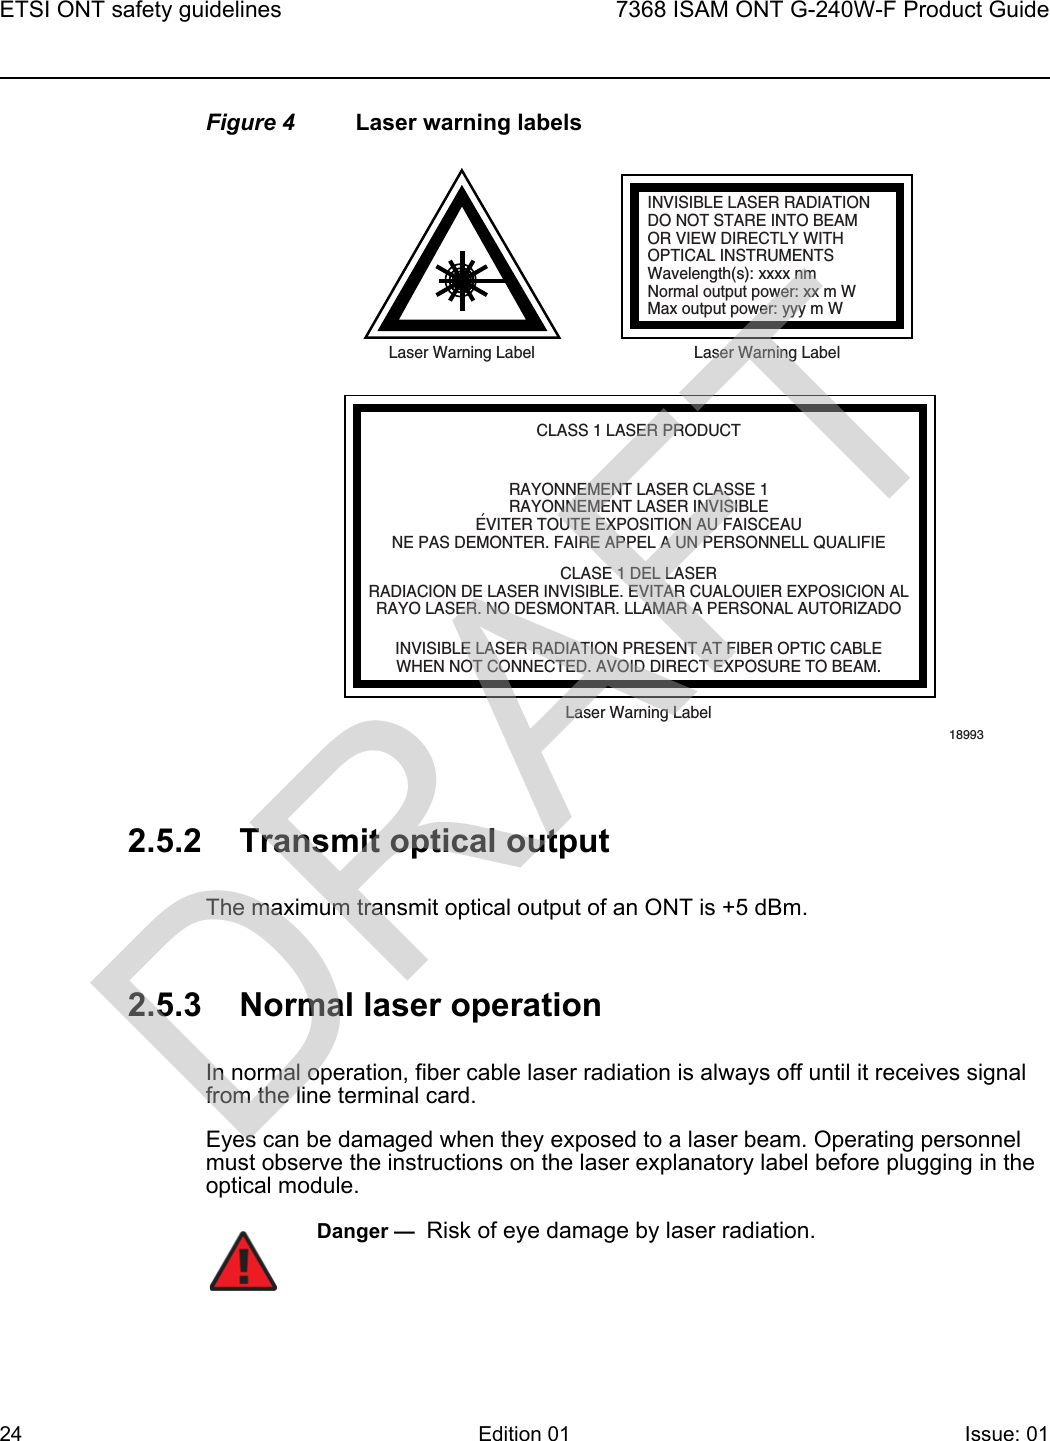 ETSI ONT safety guidelines247368 ISAM ONT G-240W-F Product GuideEdition 01 Issue: 01 Figure 4 Laser warning labels2.5.2 Transmit optical outputThe maximum transmit optical output of an ONT is +5 dBm.2.5.3 Normal laser operationIn normal operation, fiber cable laser radiation is always off until it receives signal from the line terminal card.Eyes can be damaged when they exposed to a laser beam. Operating personnel must observe the instructions on the laser explanatory label before plugging in the optical module.INVISIBLE LASER RADIATIONDO NOT STARE INTO BEAMOR VIEW DIRECTLY WITHOPTICAL INSTRUMENTSWavelength(s): xxxx nmNormal output power: xx m WMax output power: yyy m WLaser Warning Label Laser Warning LabelCLASS 1 LASER PRODUCTINVISIBLE LASER RADIATION PRESENT AT FIBER OPTIC CABLEWHEN NOT CONNECTED. AVOID DIRECT EXPOSURE TO BEAM.RAYONNEMENT LASER CLASSE 1RAYONNEMENT LASER INVISIBLEEVITER TOUTE EXPOSITION AU FAISCEAUNE PAS DEMONTER. FAIRE APPEL A UN PERSONNELL QUALIFIECLASE 1 DEL LASERRADIACION DE LASER INVISIBLE. EVITAR CUALOUIER EXPOSICION ALRAYO LASER. NO DESMONTAR. LLAMAR A PERSONAL AUTORIZADOLaser Warning Label18993&apos;Danger —  Risk of eye damage by laser radiation.DRAFT